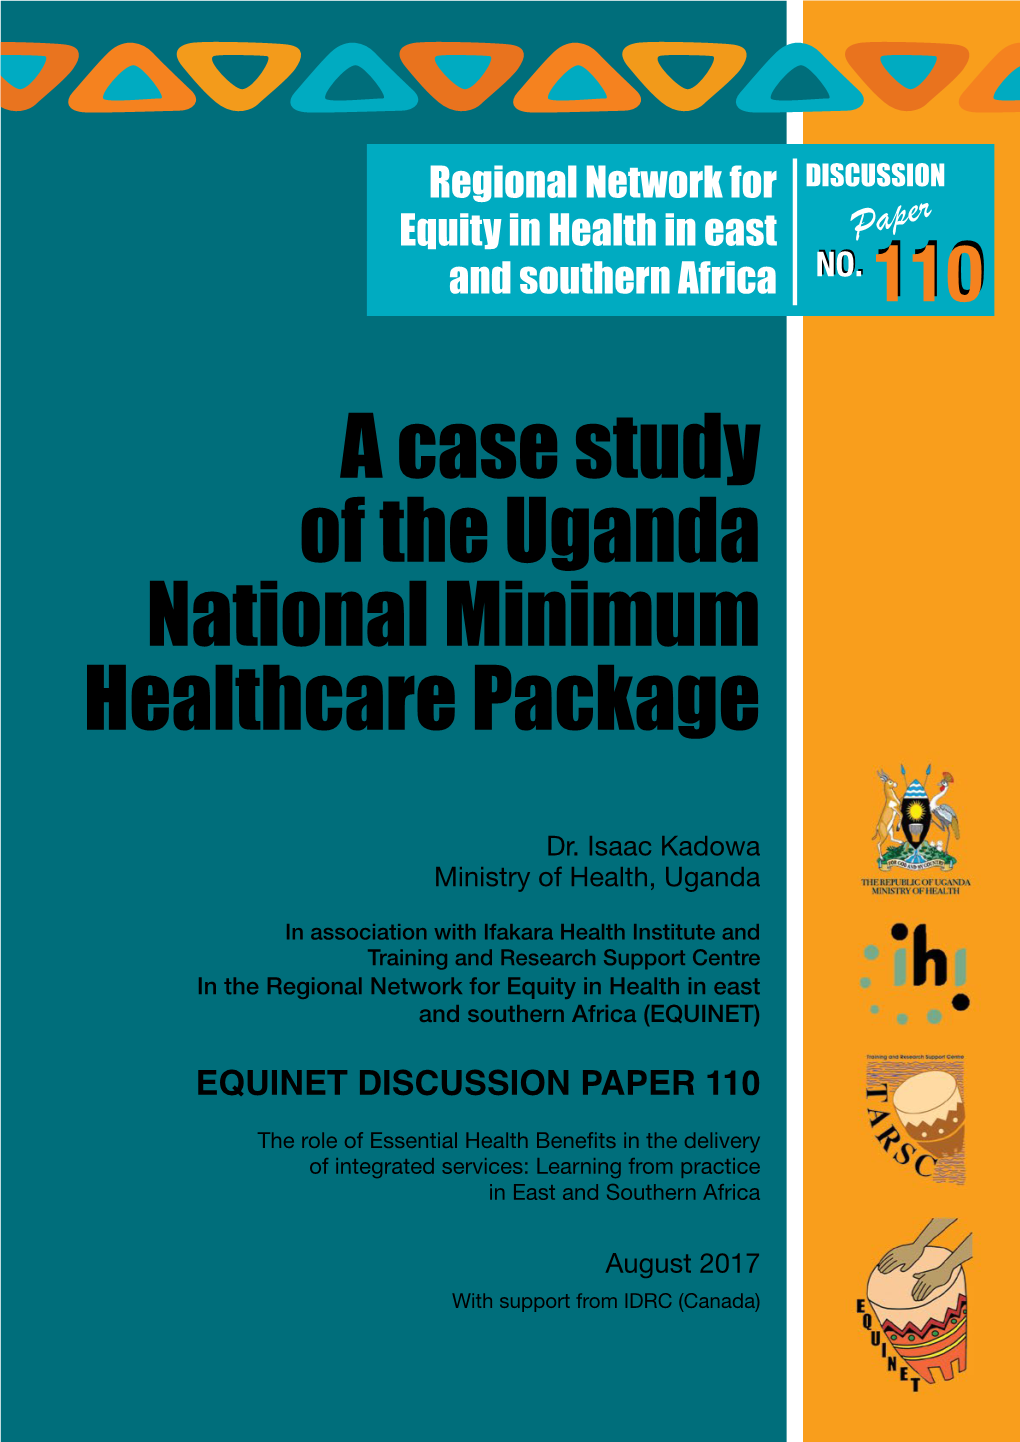 A Case Study of the Uganda National Minimum Healthcare Package